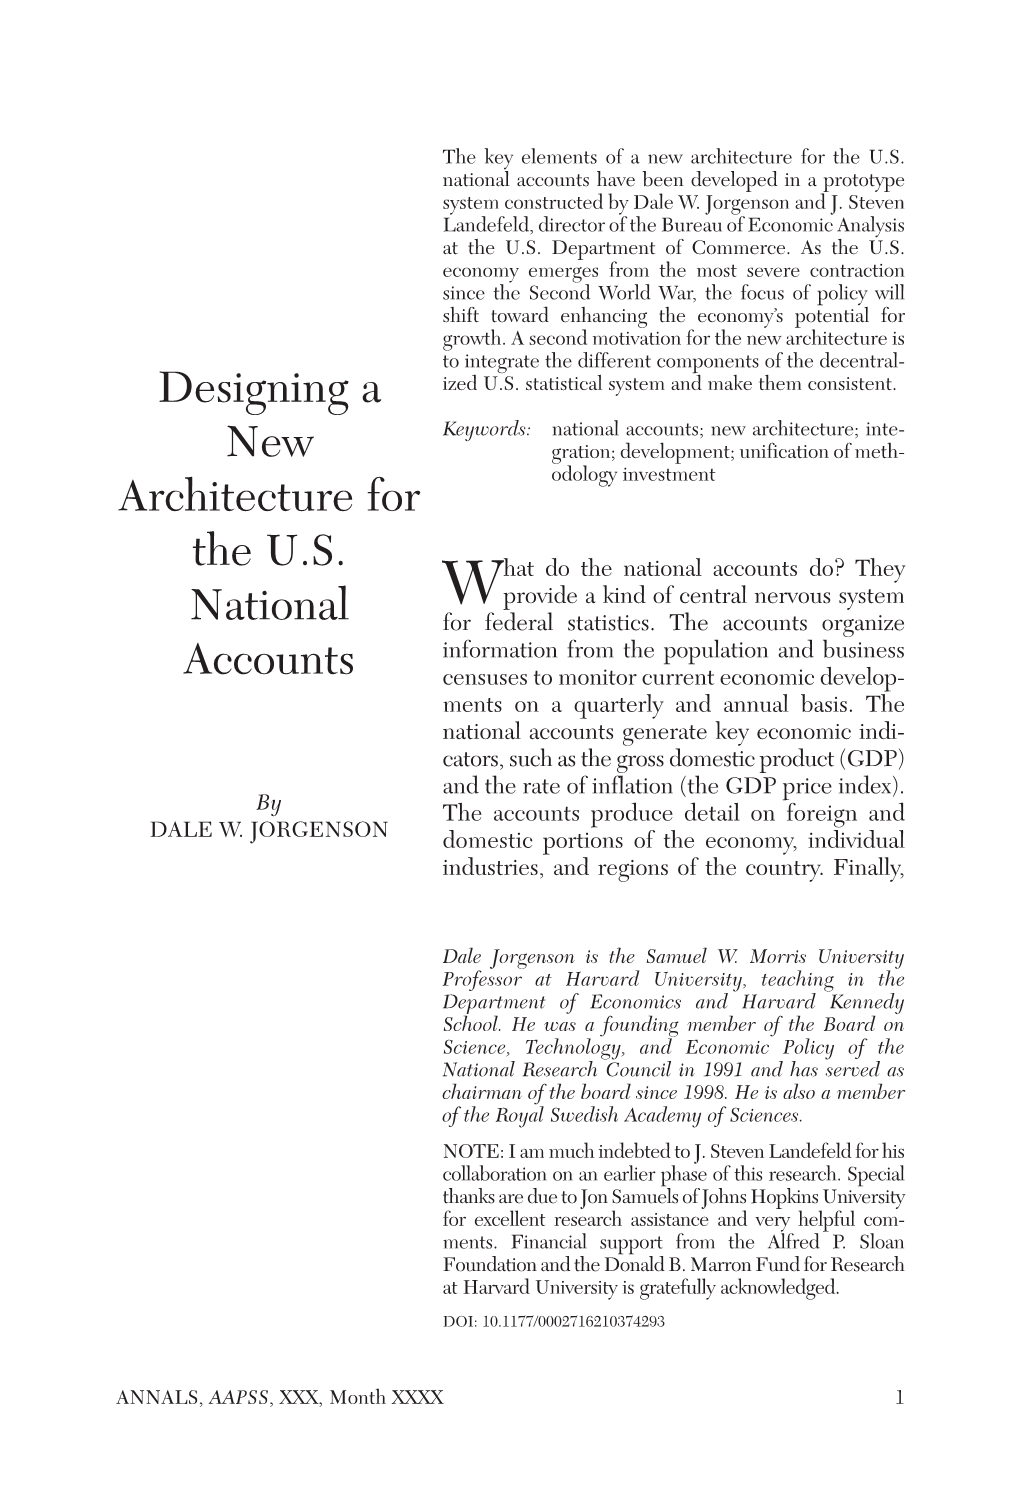 Designing a New Architecture for the U.S. National Accounts